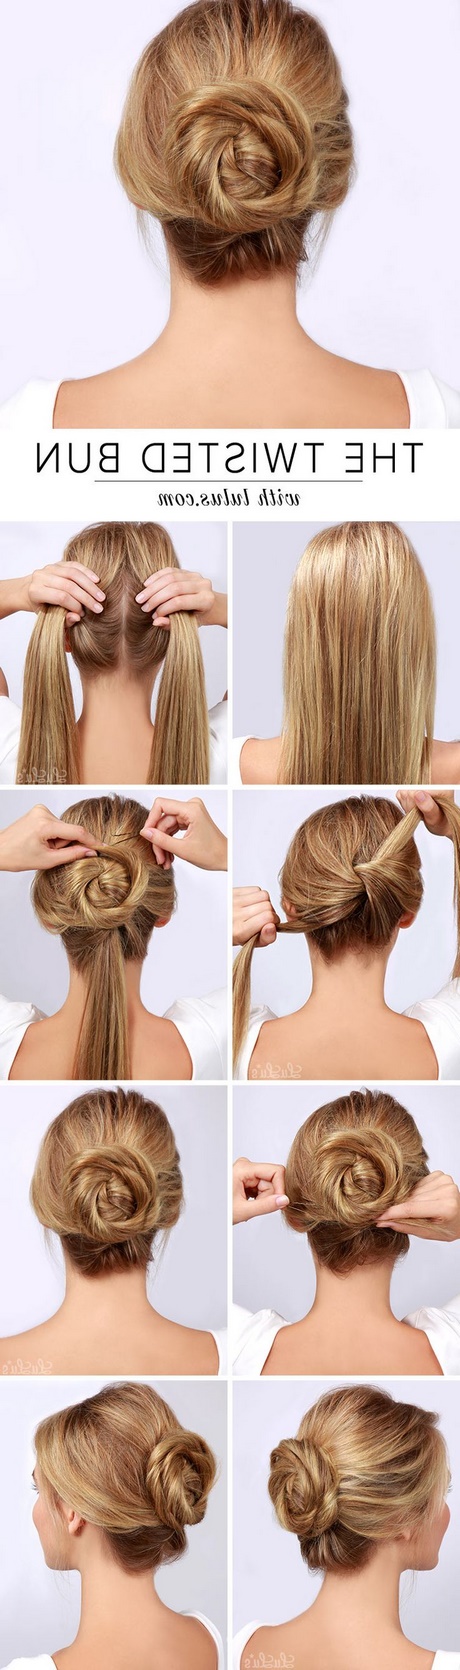 quick-easy-updo-hairstyles-38_13 Quick easy updo hairstyles